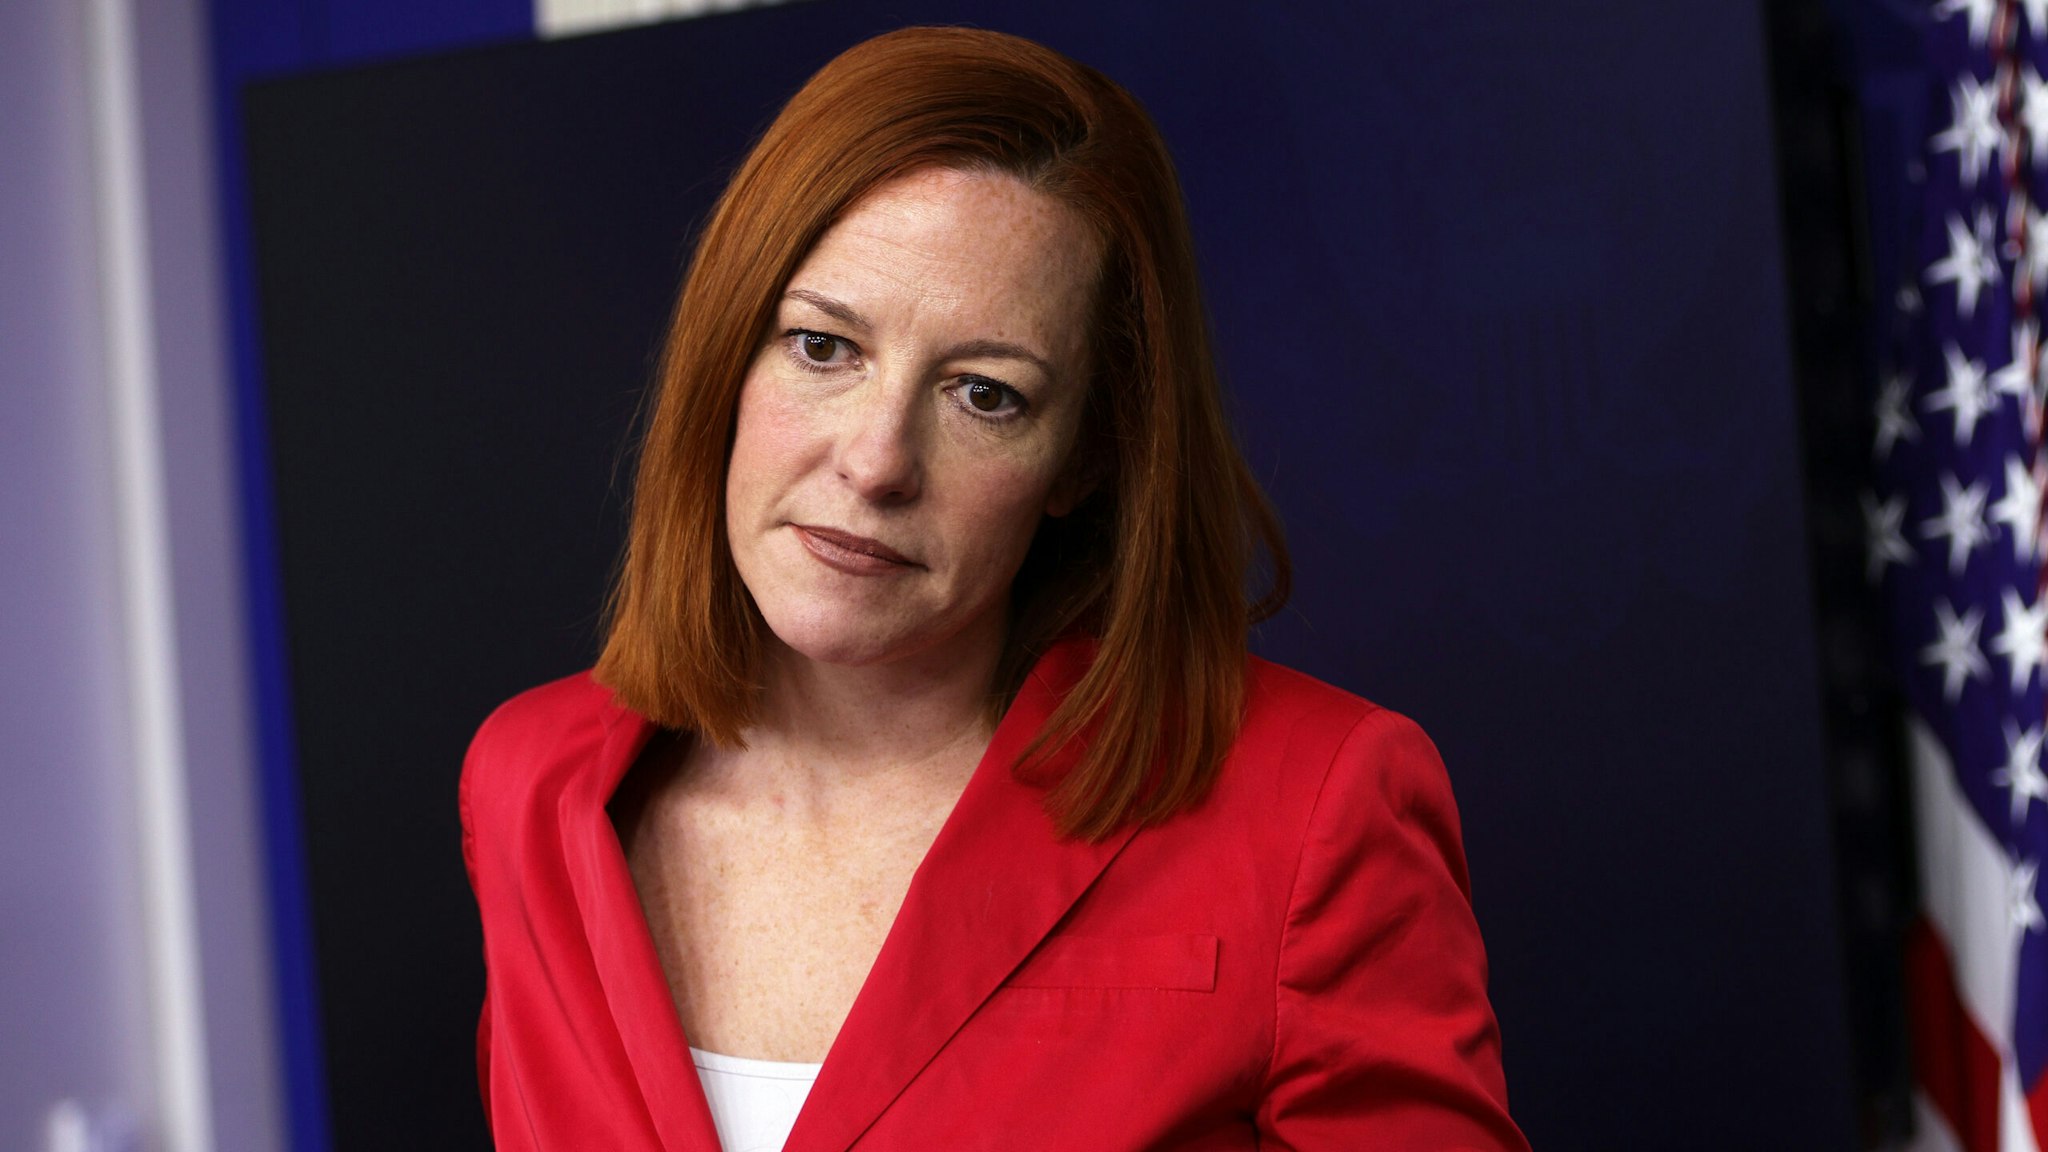 WASHINGTON, DC - MARCH 11: White House Press Secretary Jen Psaki listens during a daily press briefing at the James Brady Press Briefing Room of the White House on March 11, 2021 in Washington, DC. Psaki held a briefing to answer questions from members of the press.